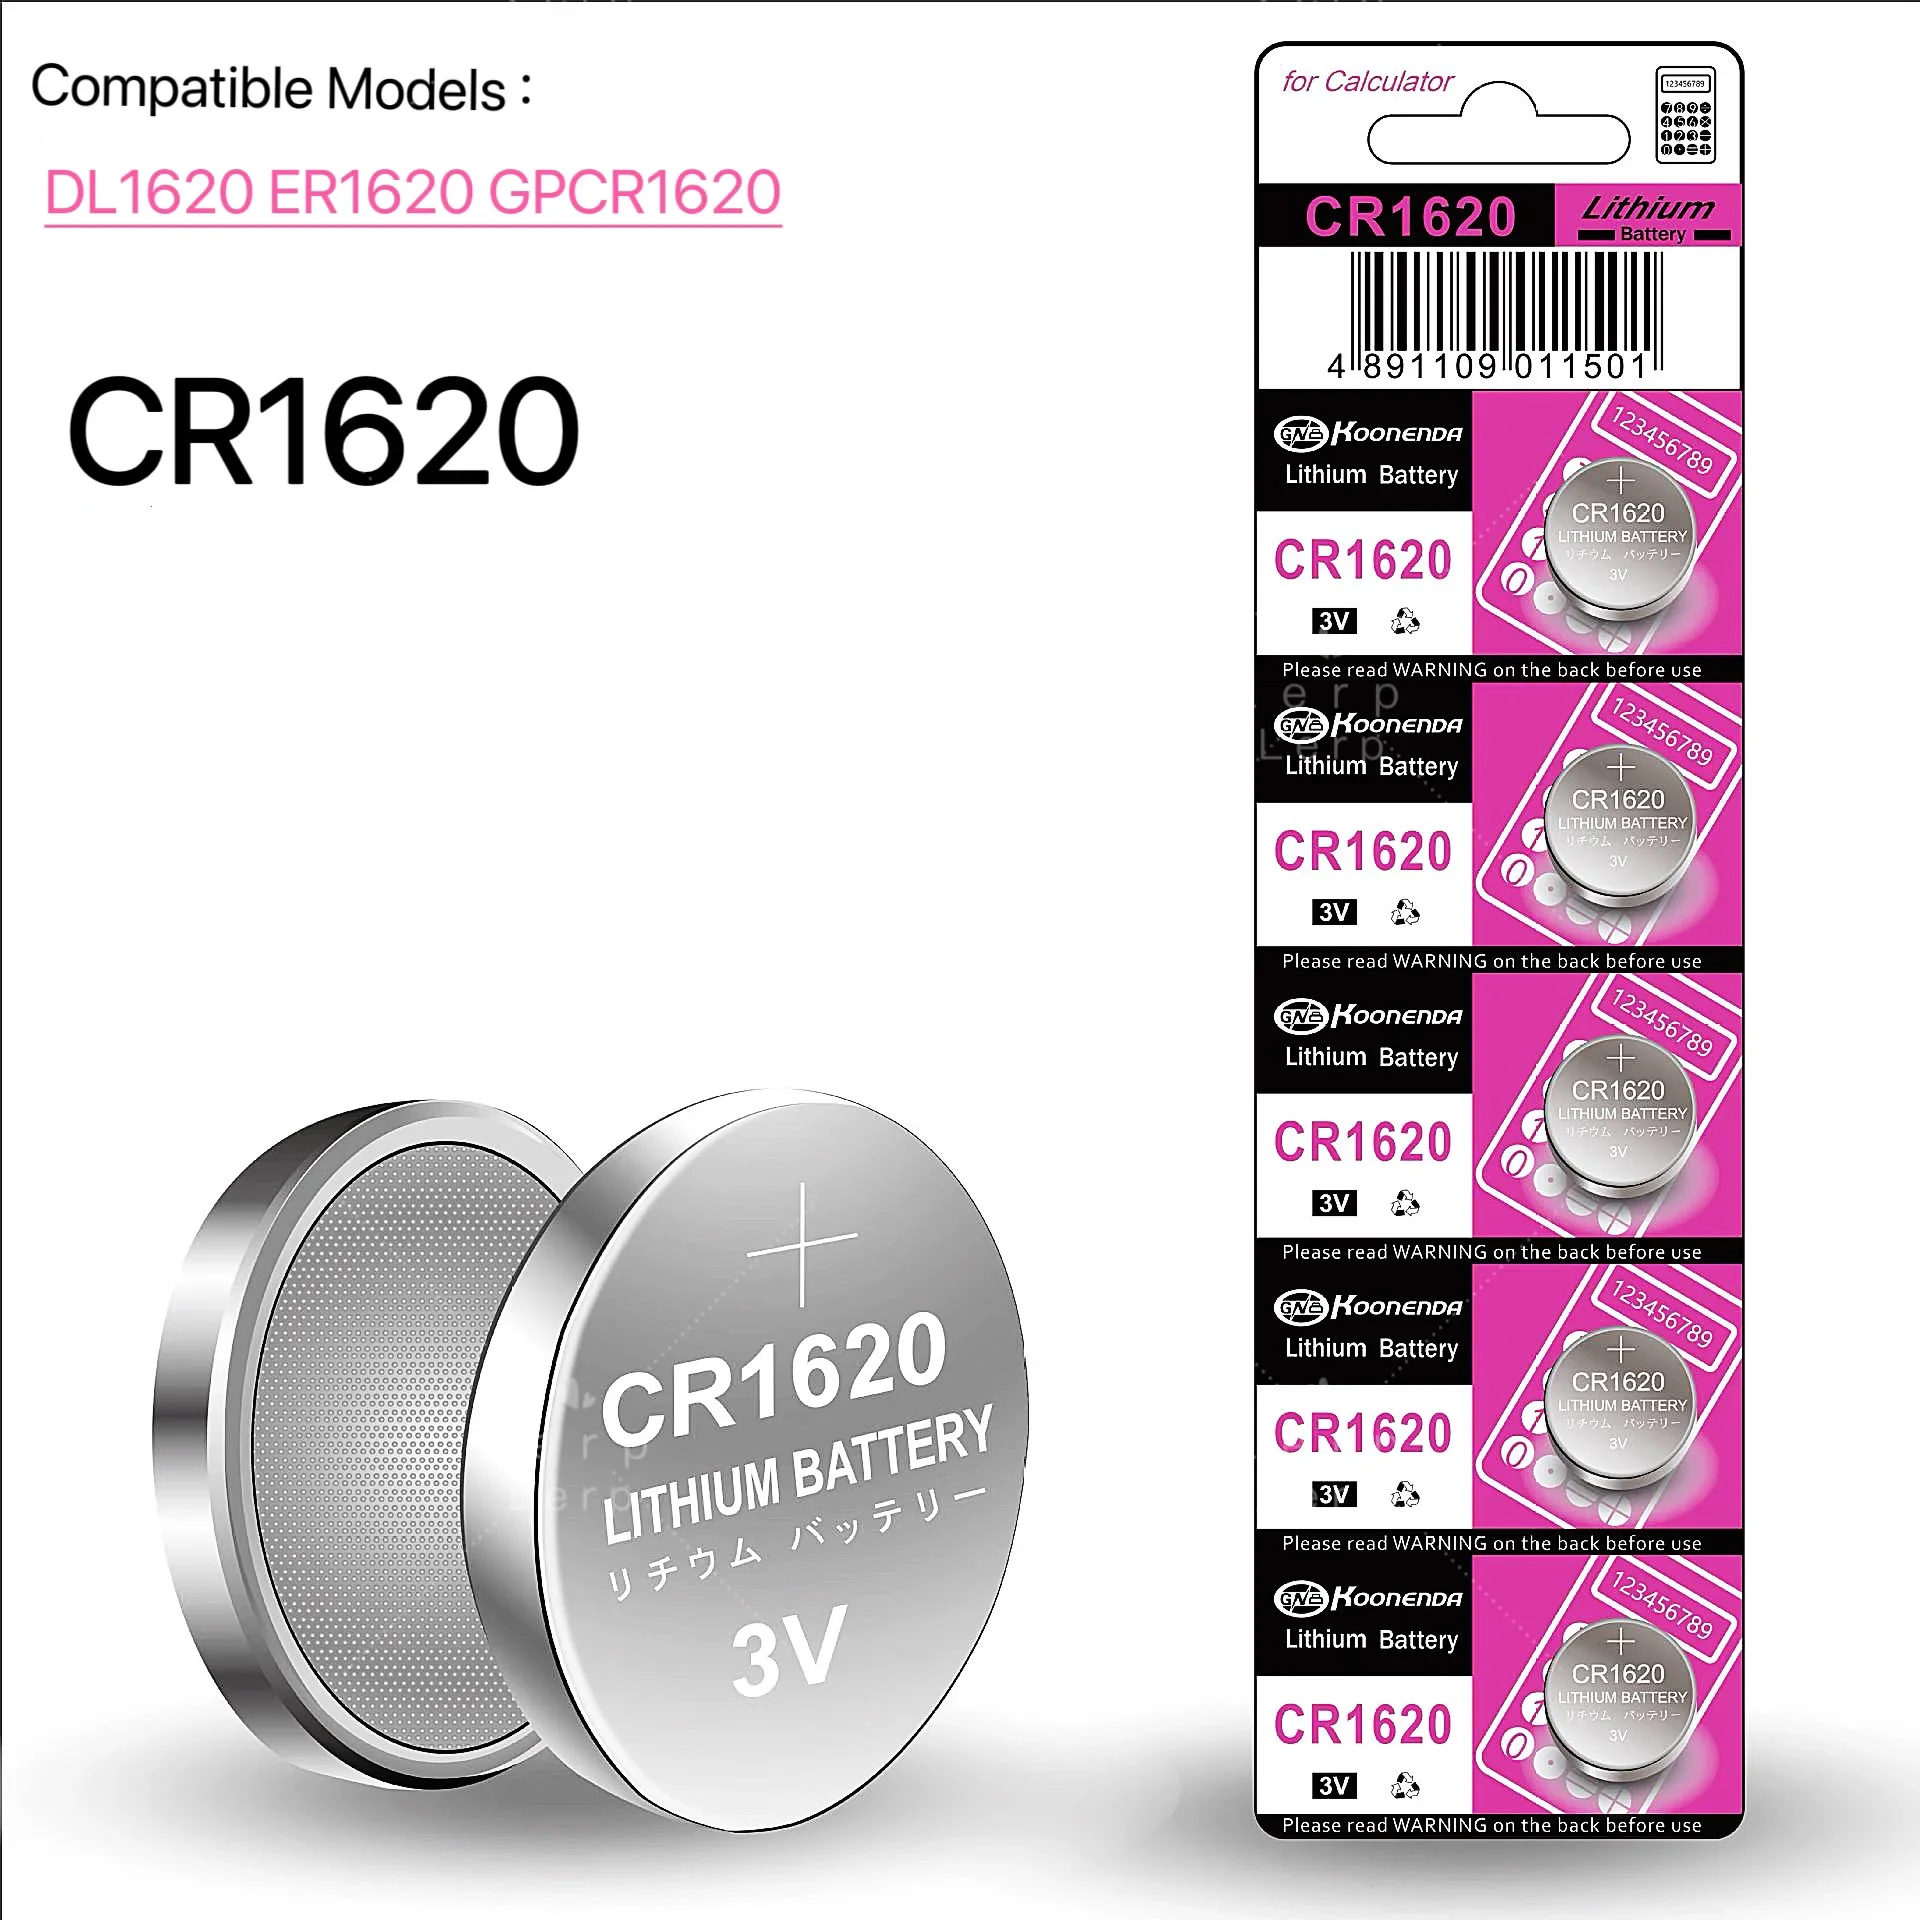 

CR1620 button battery car key remote control 3V lithium battery，Compatible with the DL1620 ER1620 GPCR1620